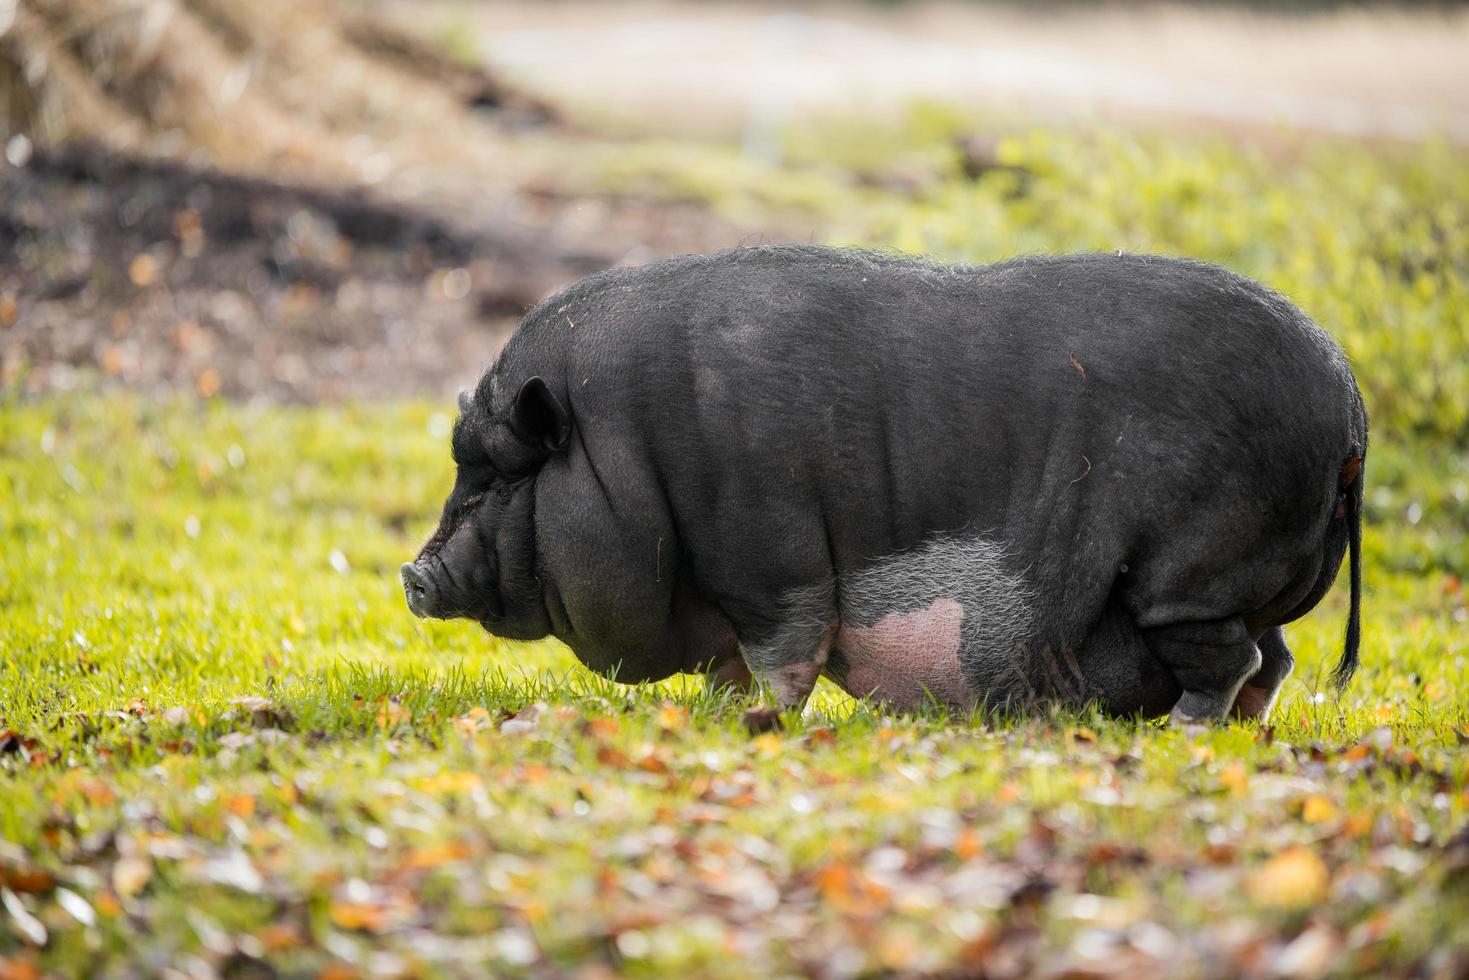 Pig in grass photo